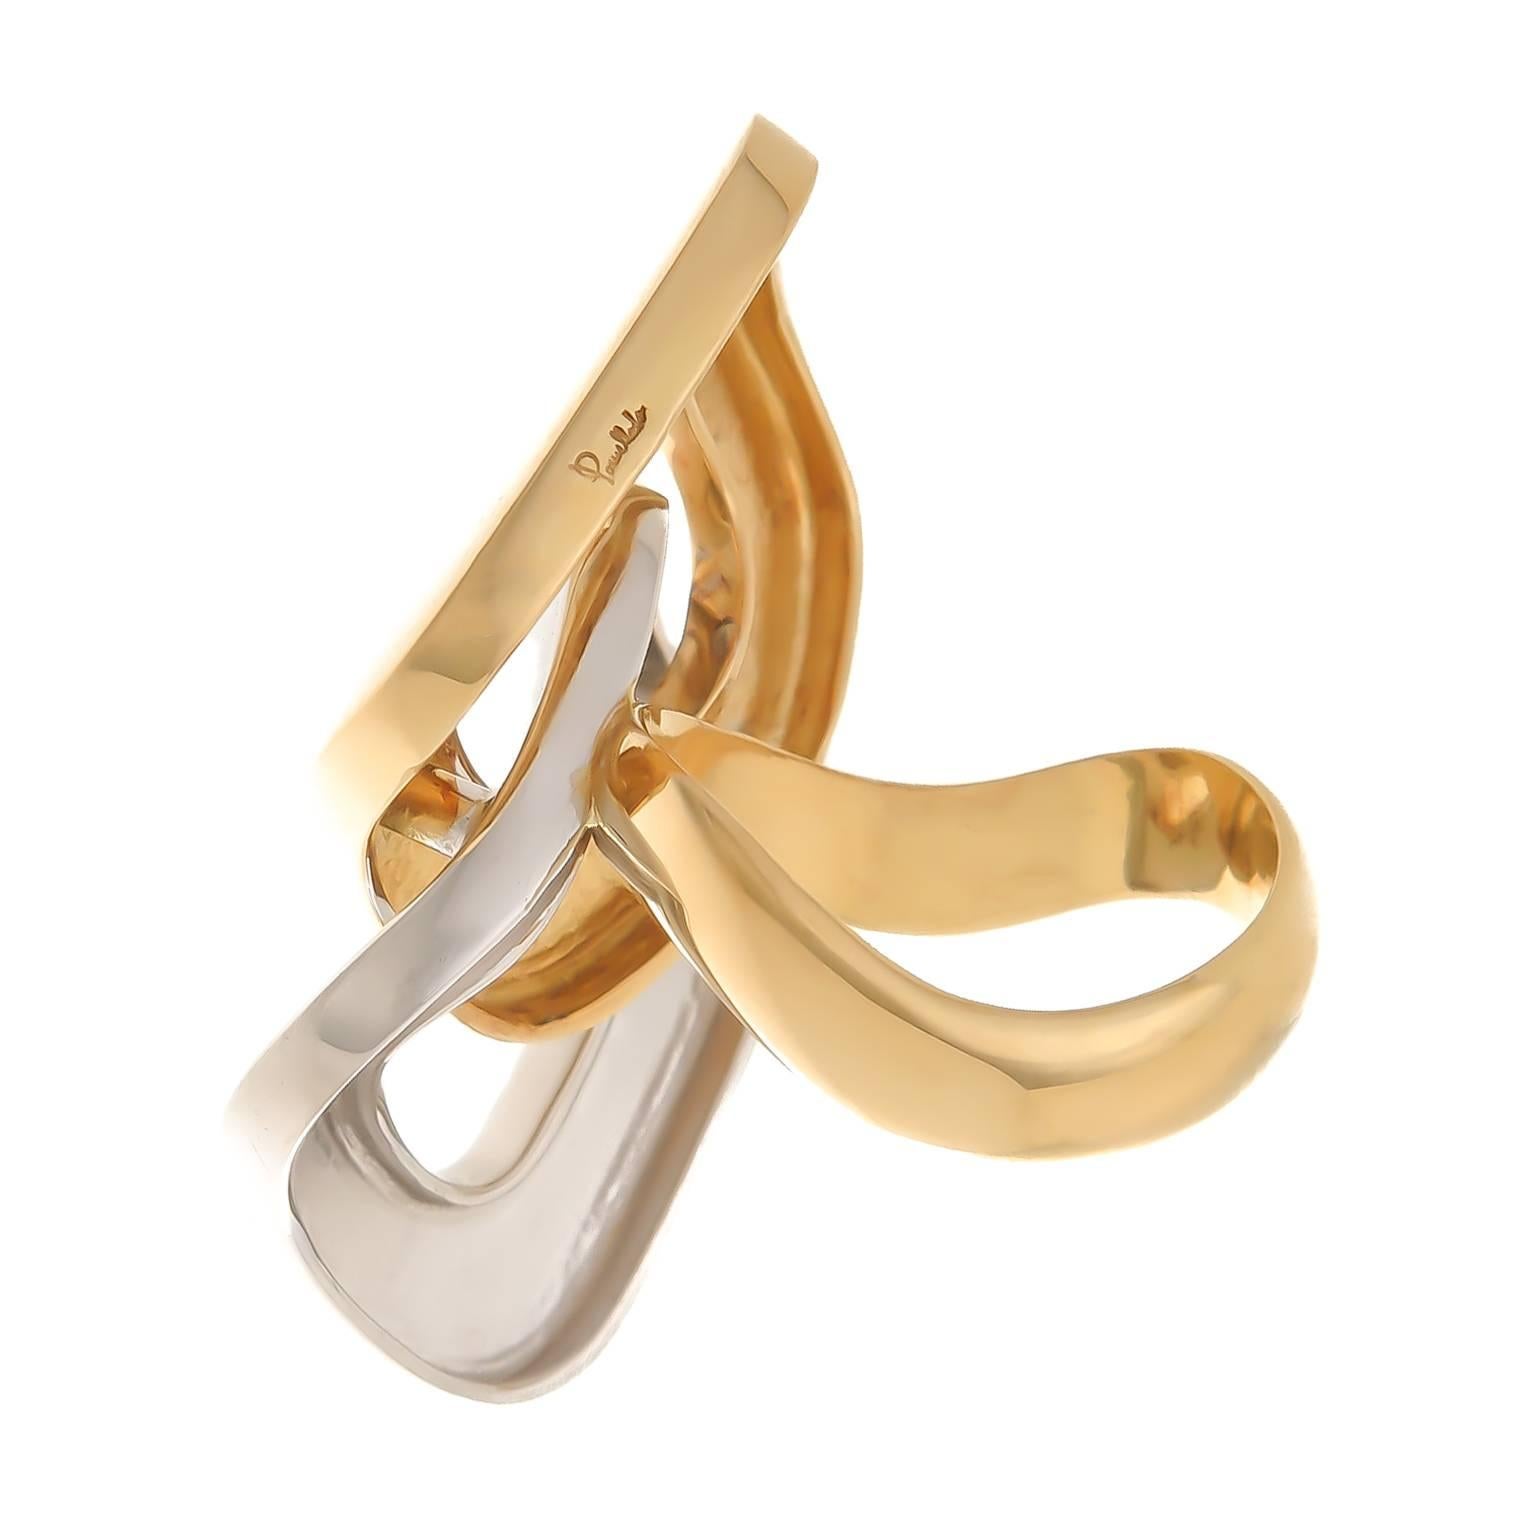 Pomellato 18K White and Yellow Gold ring in an interlocking Cushion link design. Measuring 1 1/2 inch in length and 1 inch wide. Finger size = 5 1/2.